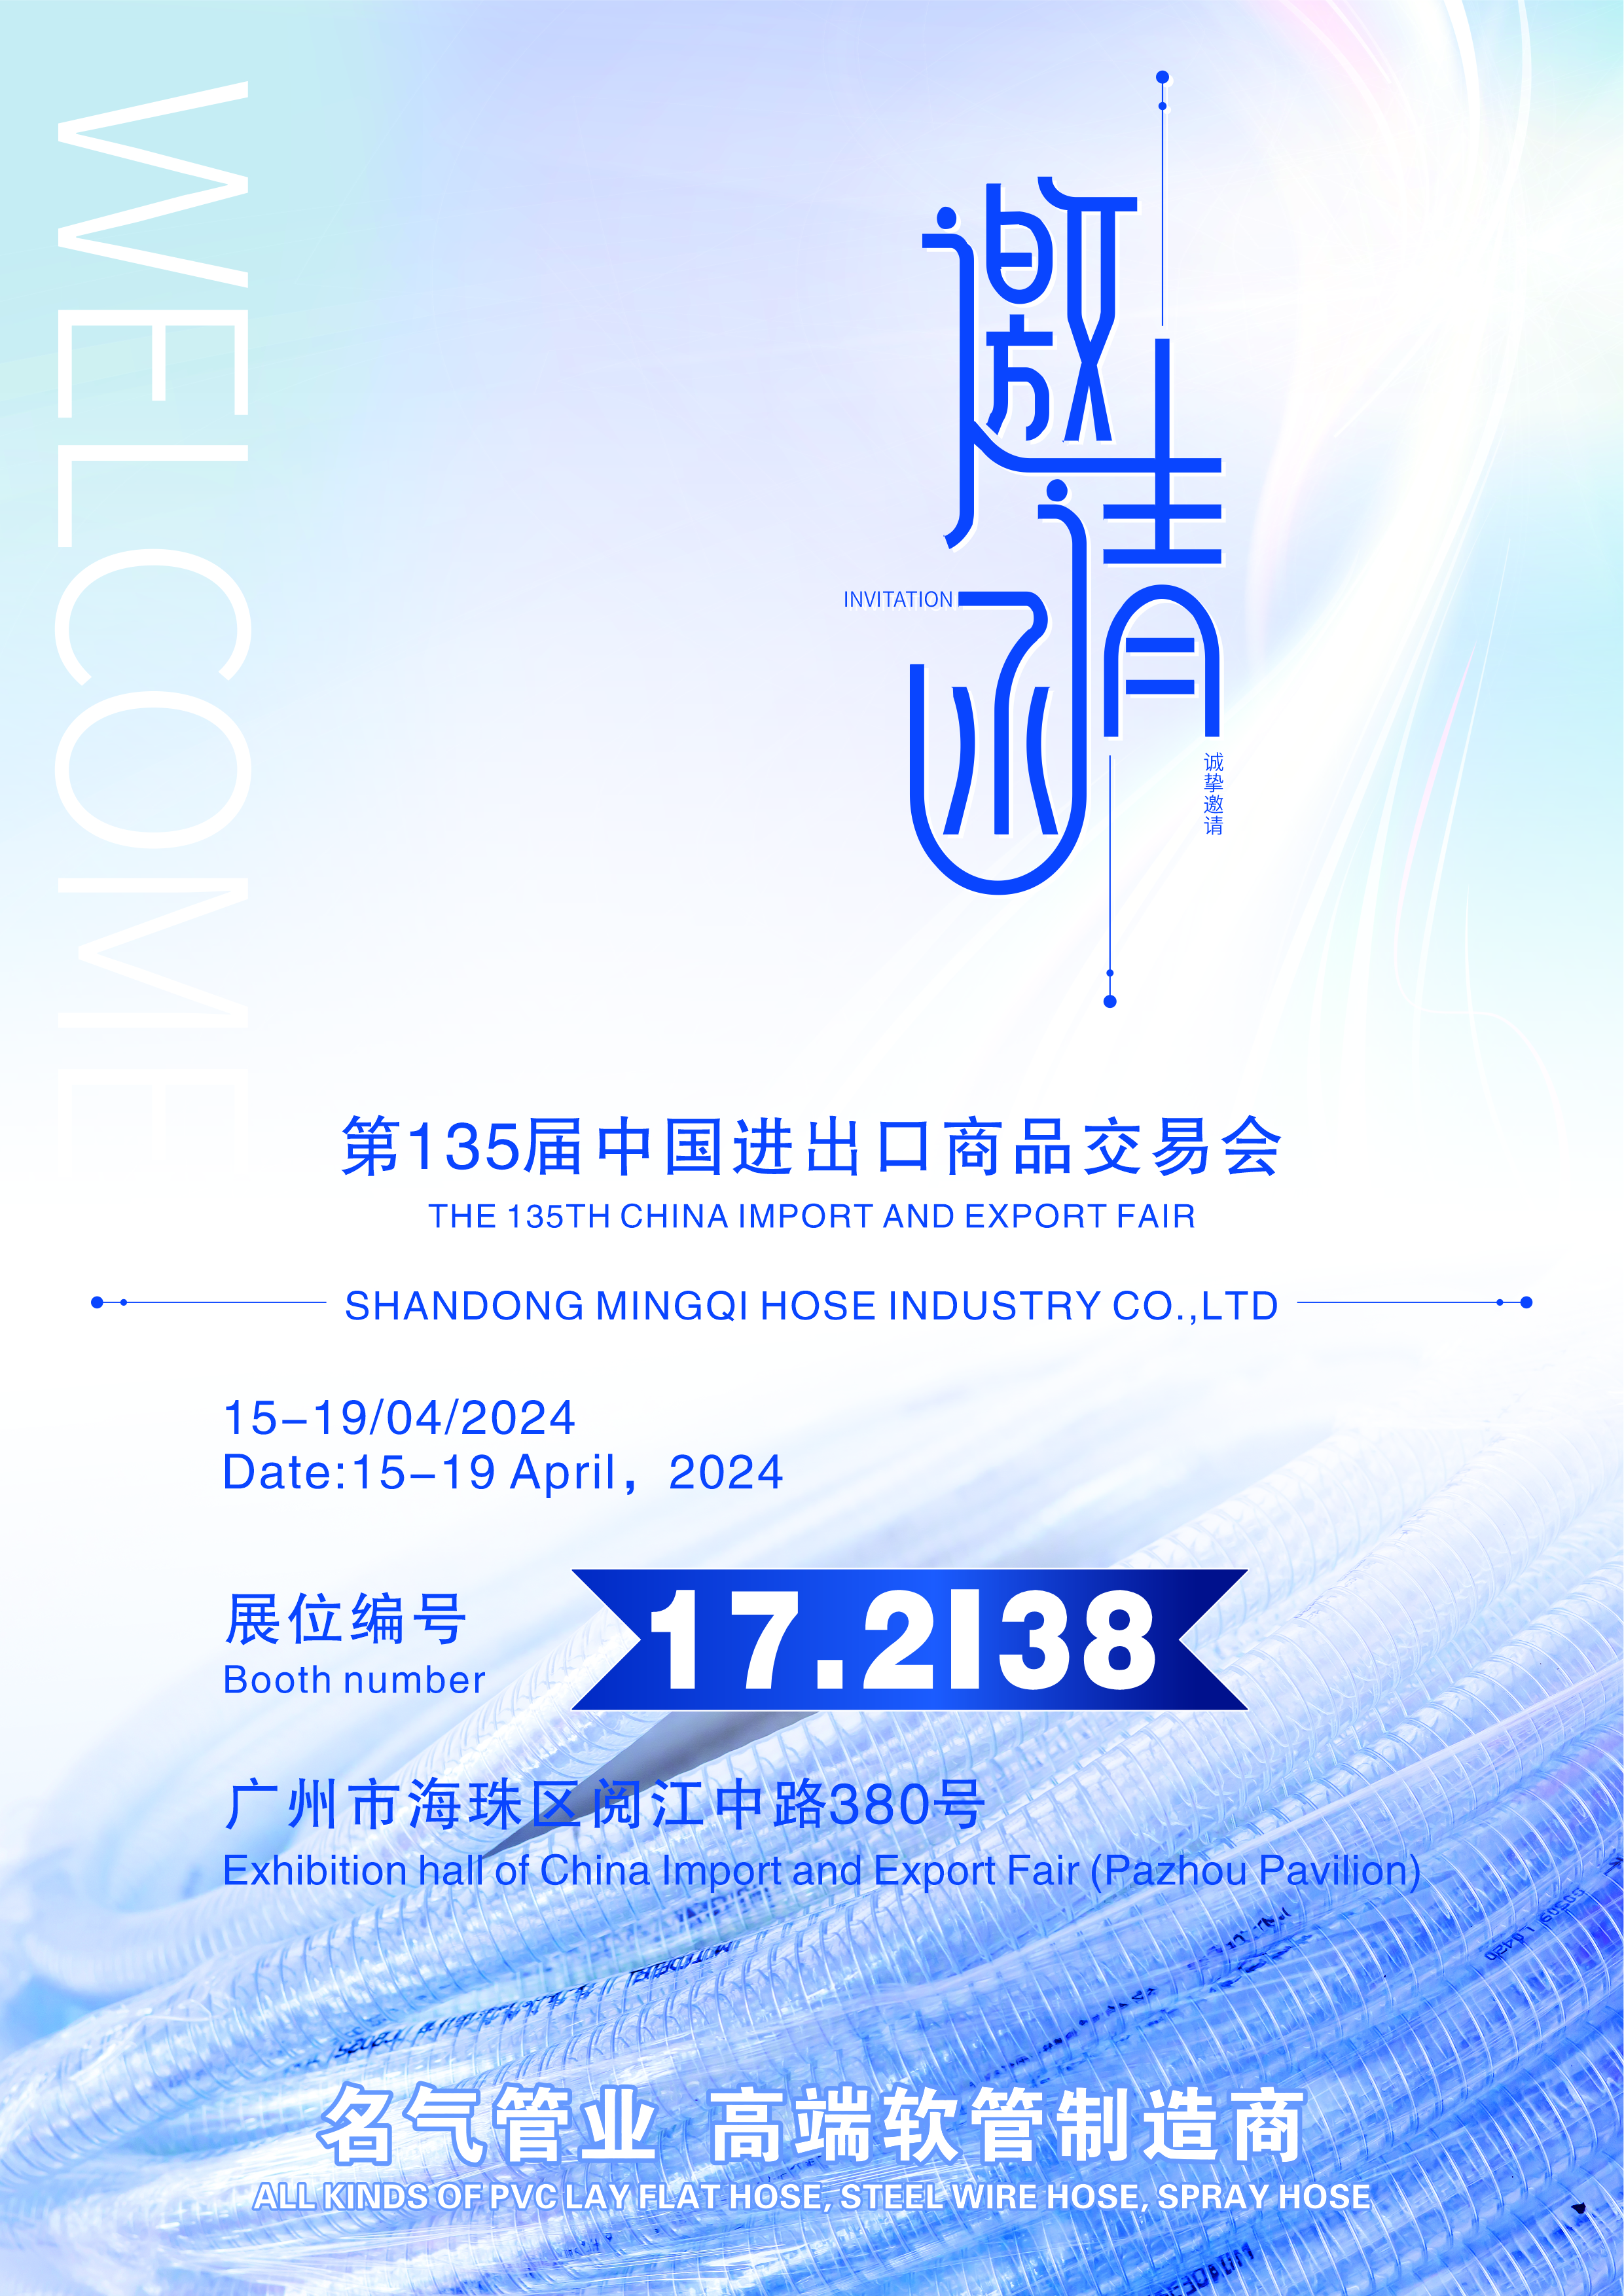 Shandong Mingqi Hose Industry Co., Ltd. to Showcase Innovative PVC Hose Products at the 135th China Import and Export Fair (Canton Fair)